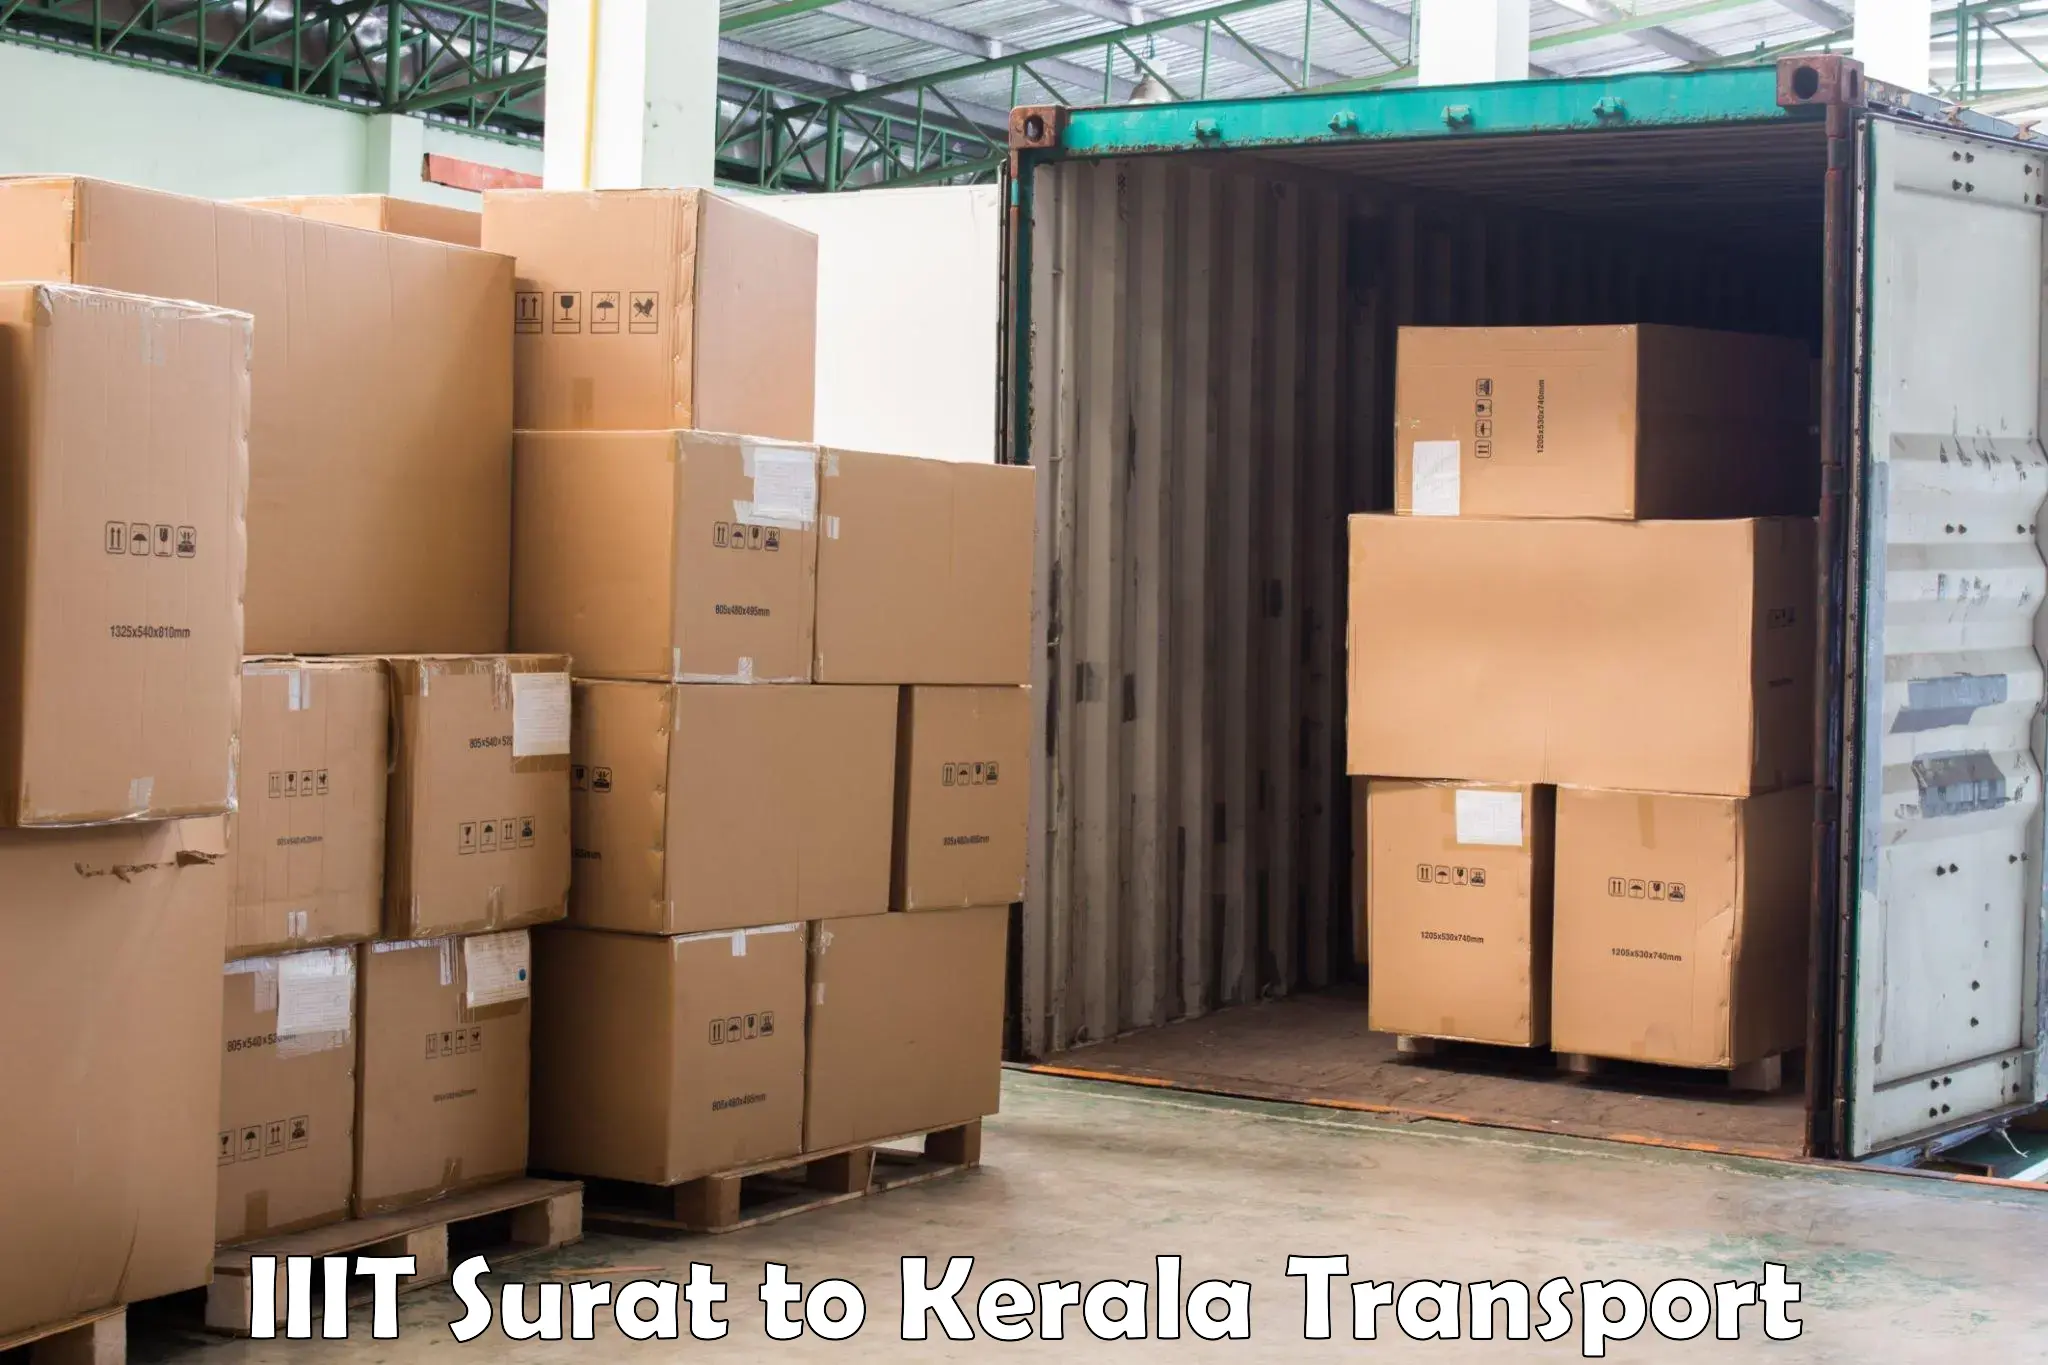 Daily parcel service transport IIIT Surat to Cochin